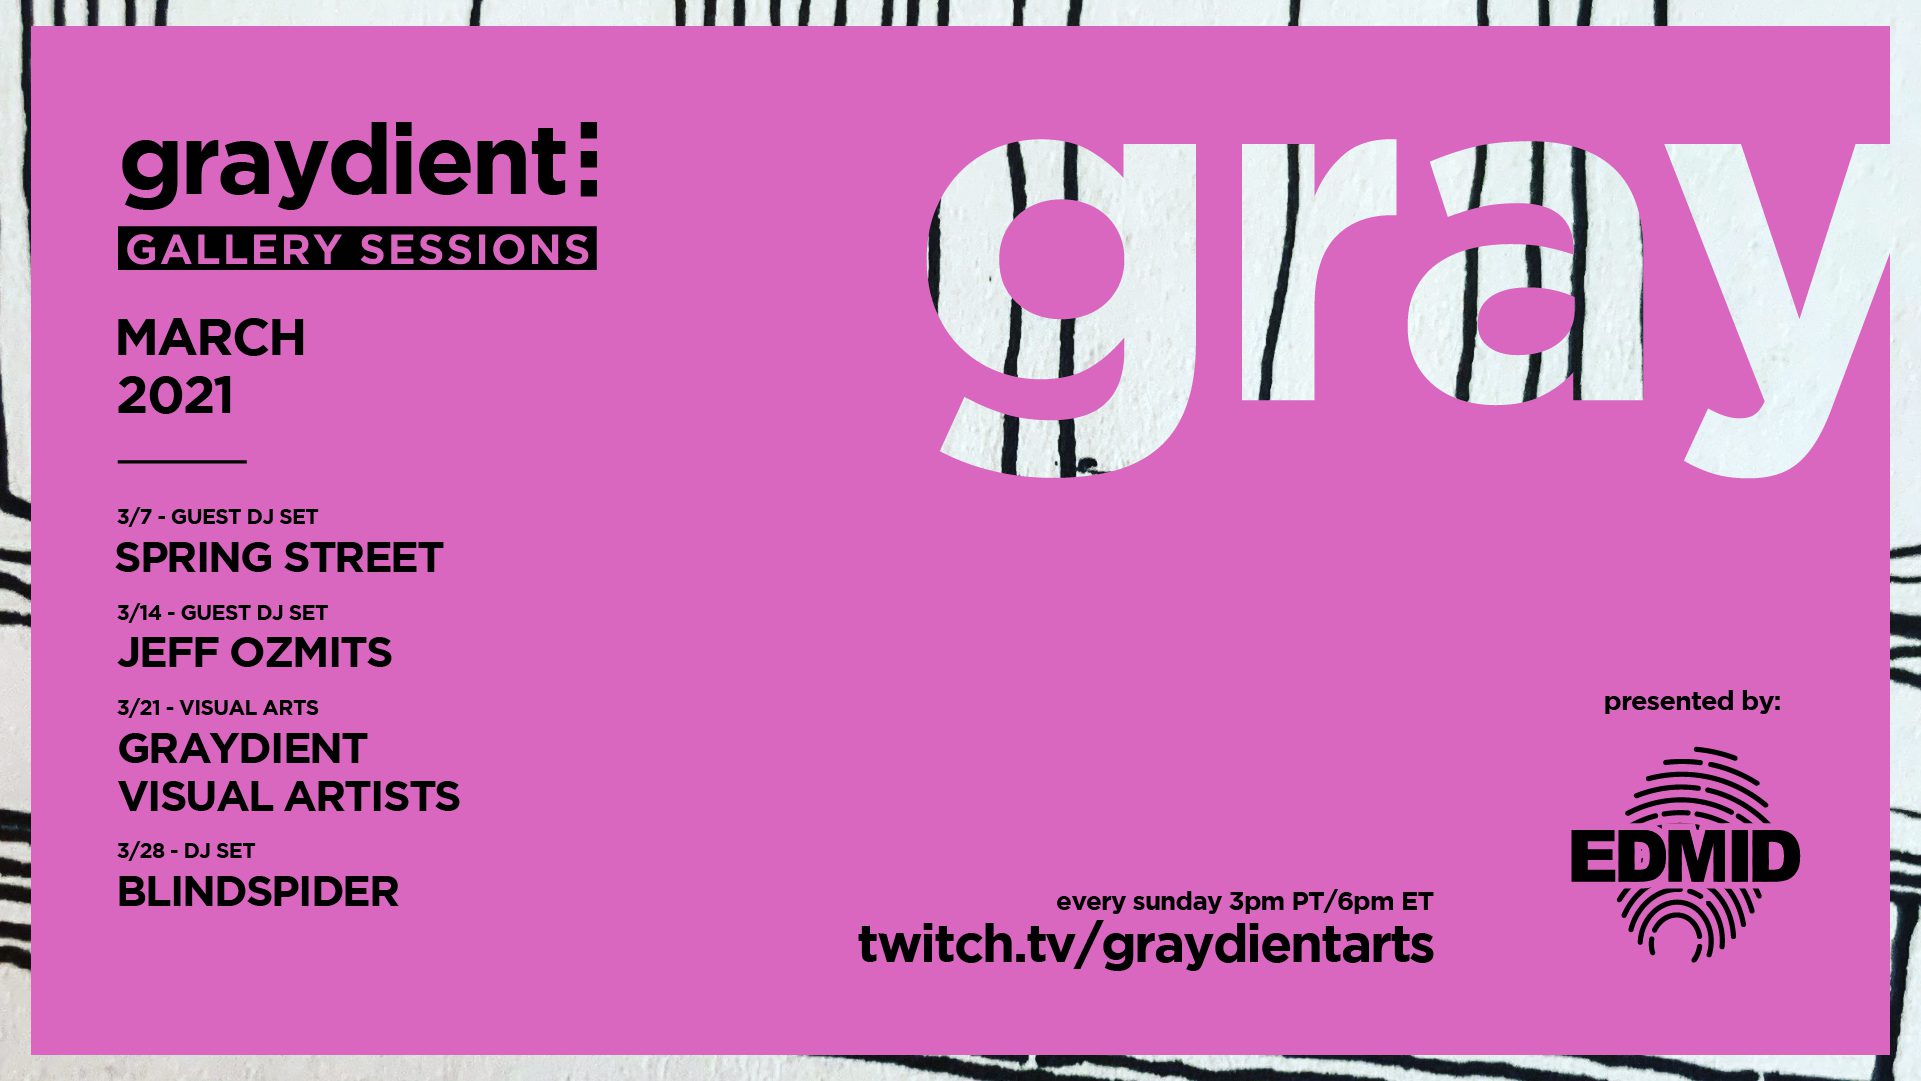 Graydient Collective Gallery Sessions March 2021 Lineup